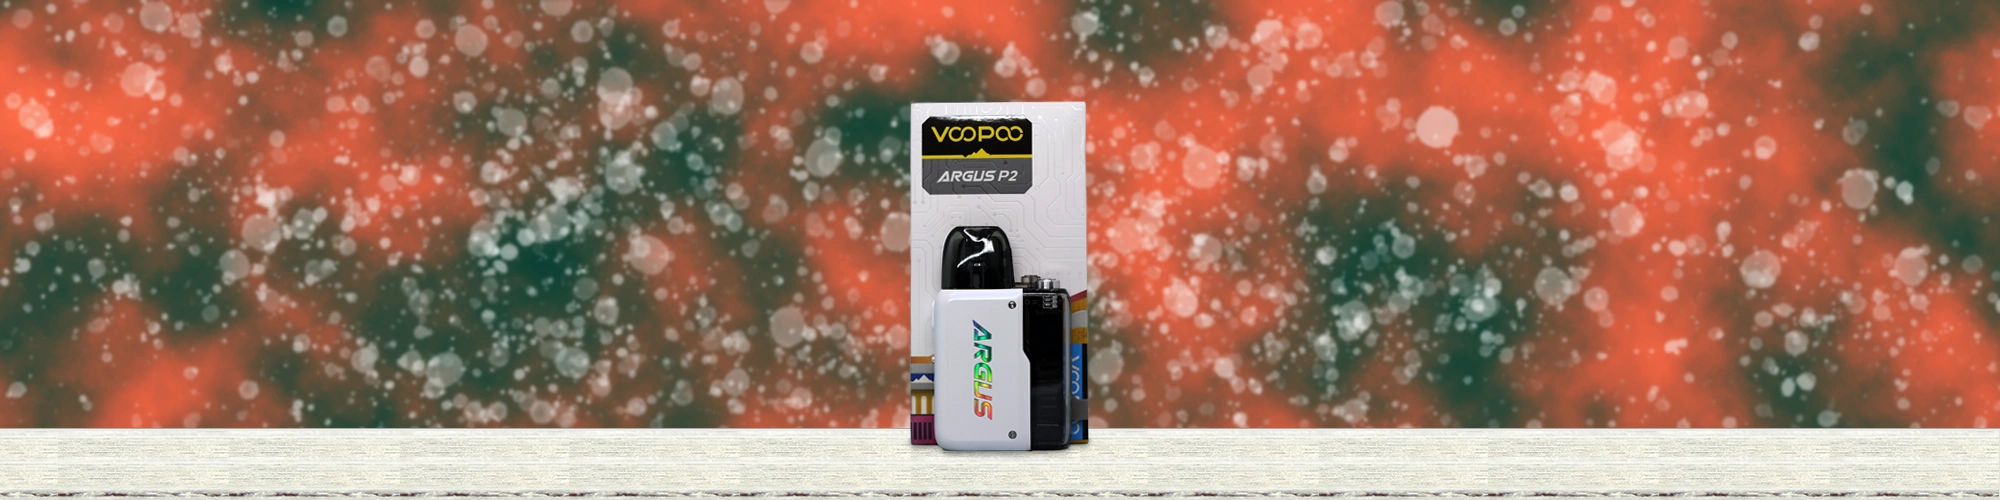 Voopoo Argus P2 Review Main Banner